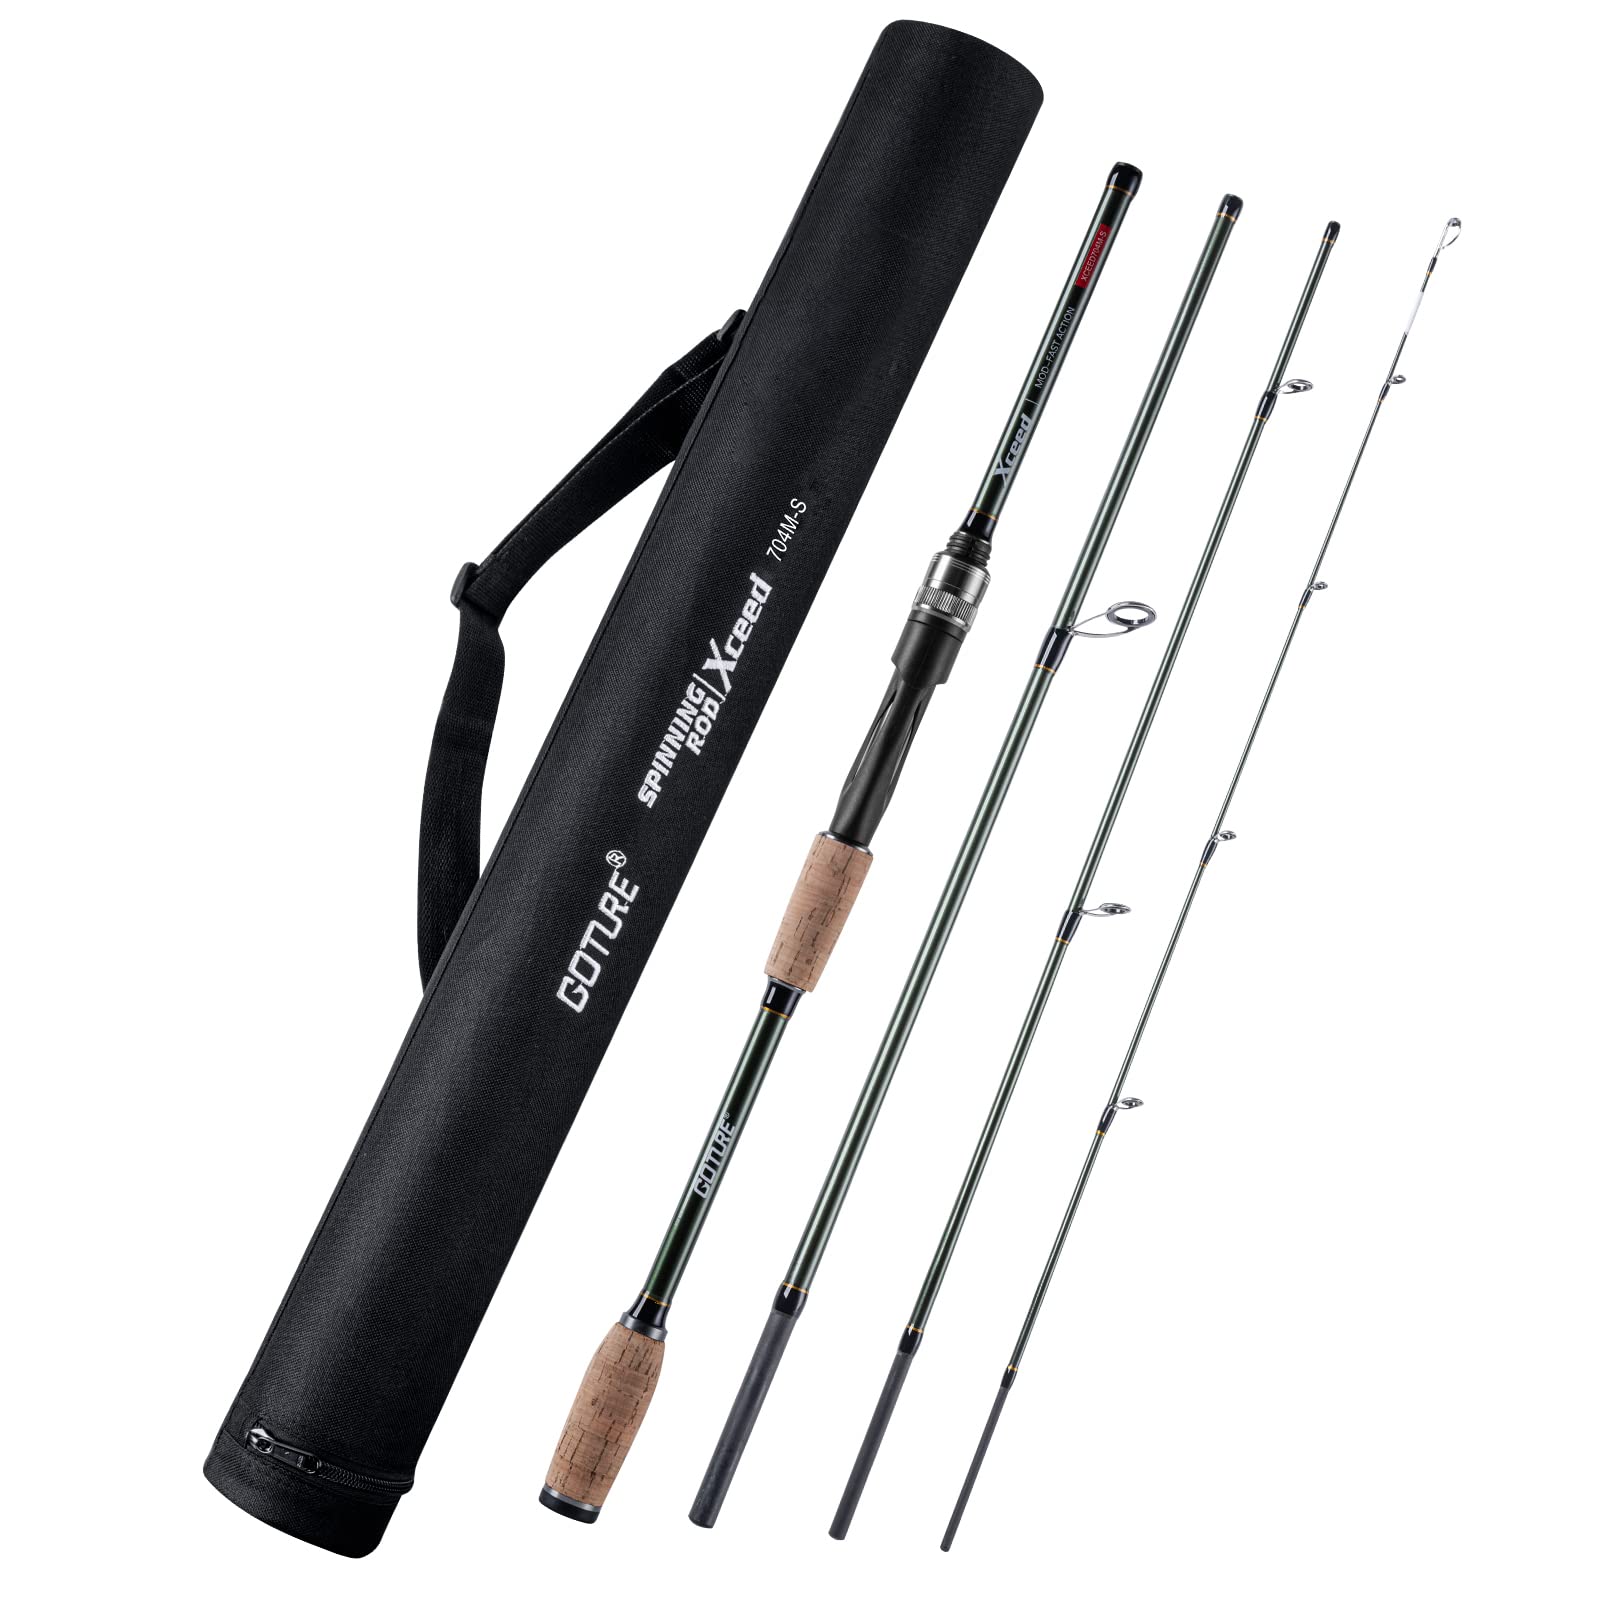 Goture Travel Fishing Rods, 4 Piece Fishing Pole with Case/Bag,Surf Casting/Spinning  Rod,Ultralight Fishing Baitcasting Rod 7ft for Saltwater Trout, Bass,  Walleye, Pike 4 Piece Fishing Rod - Blue Spin